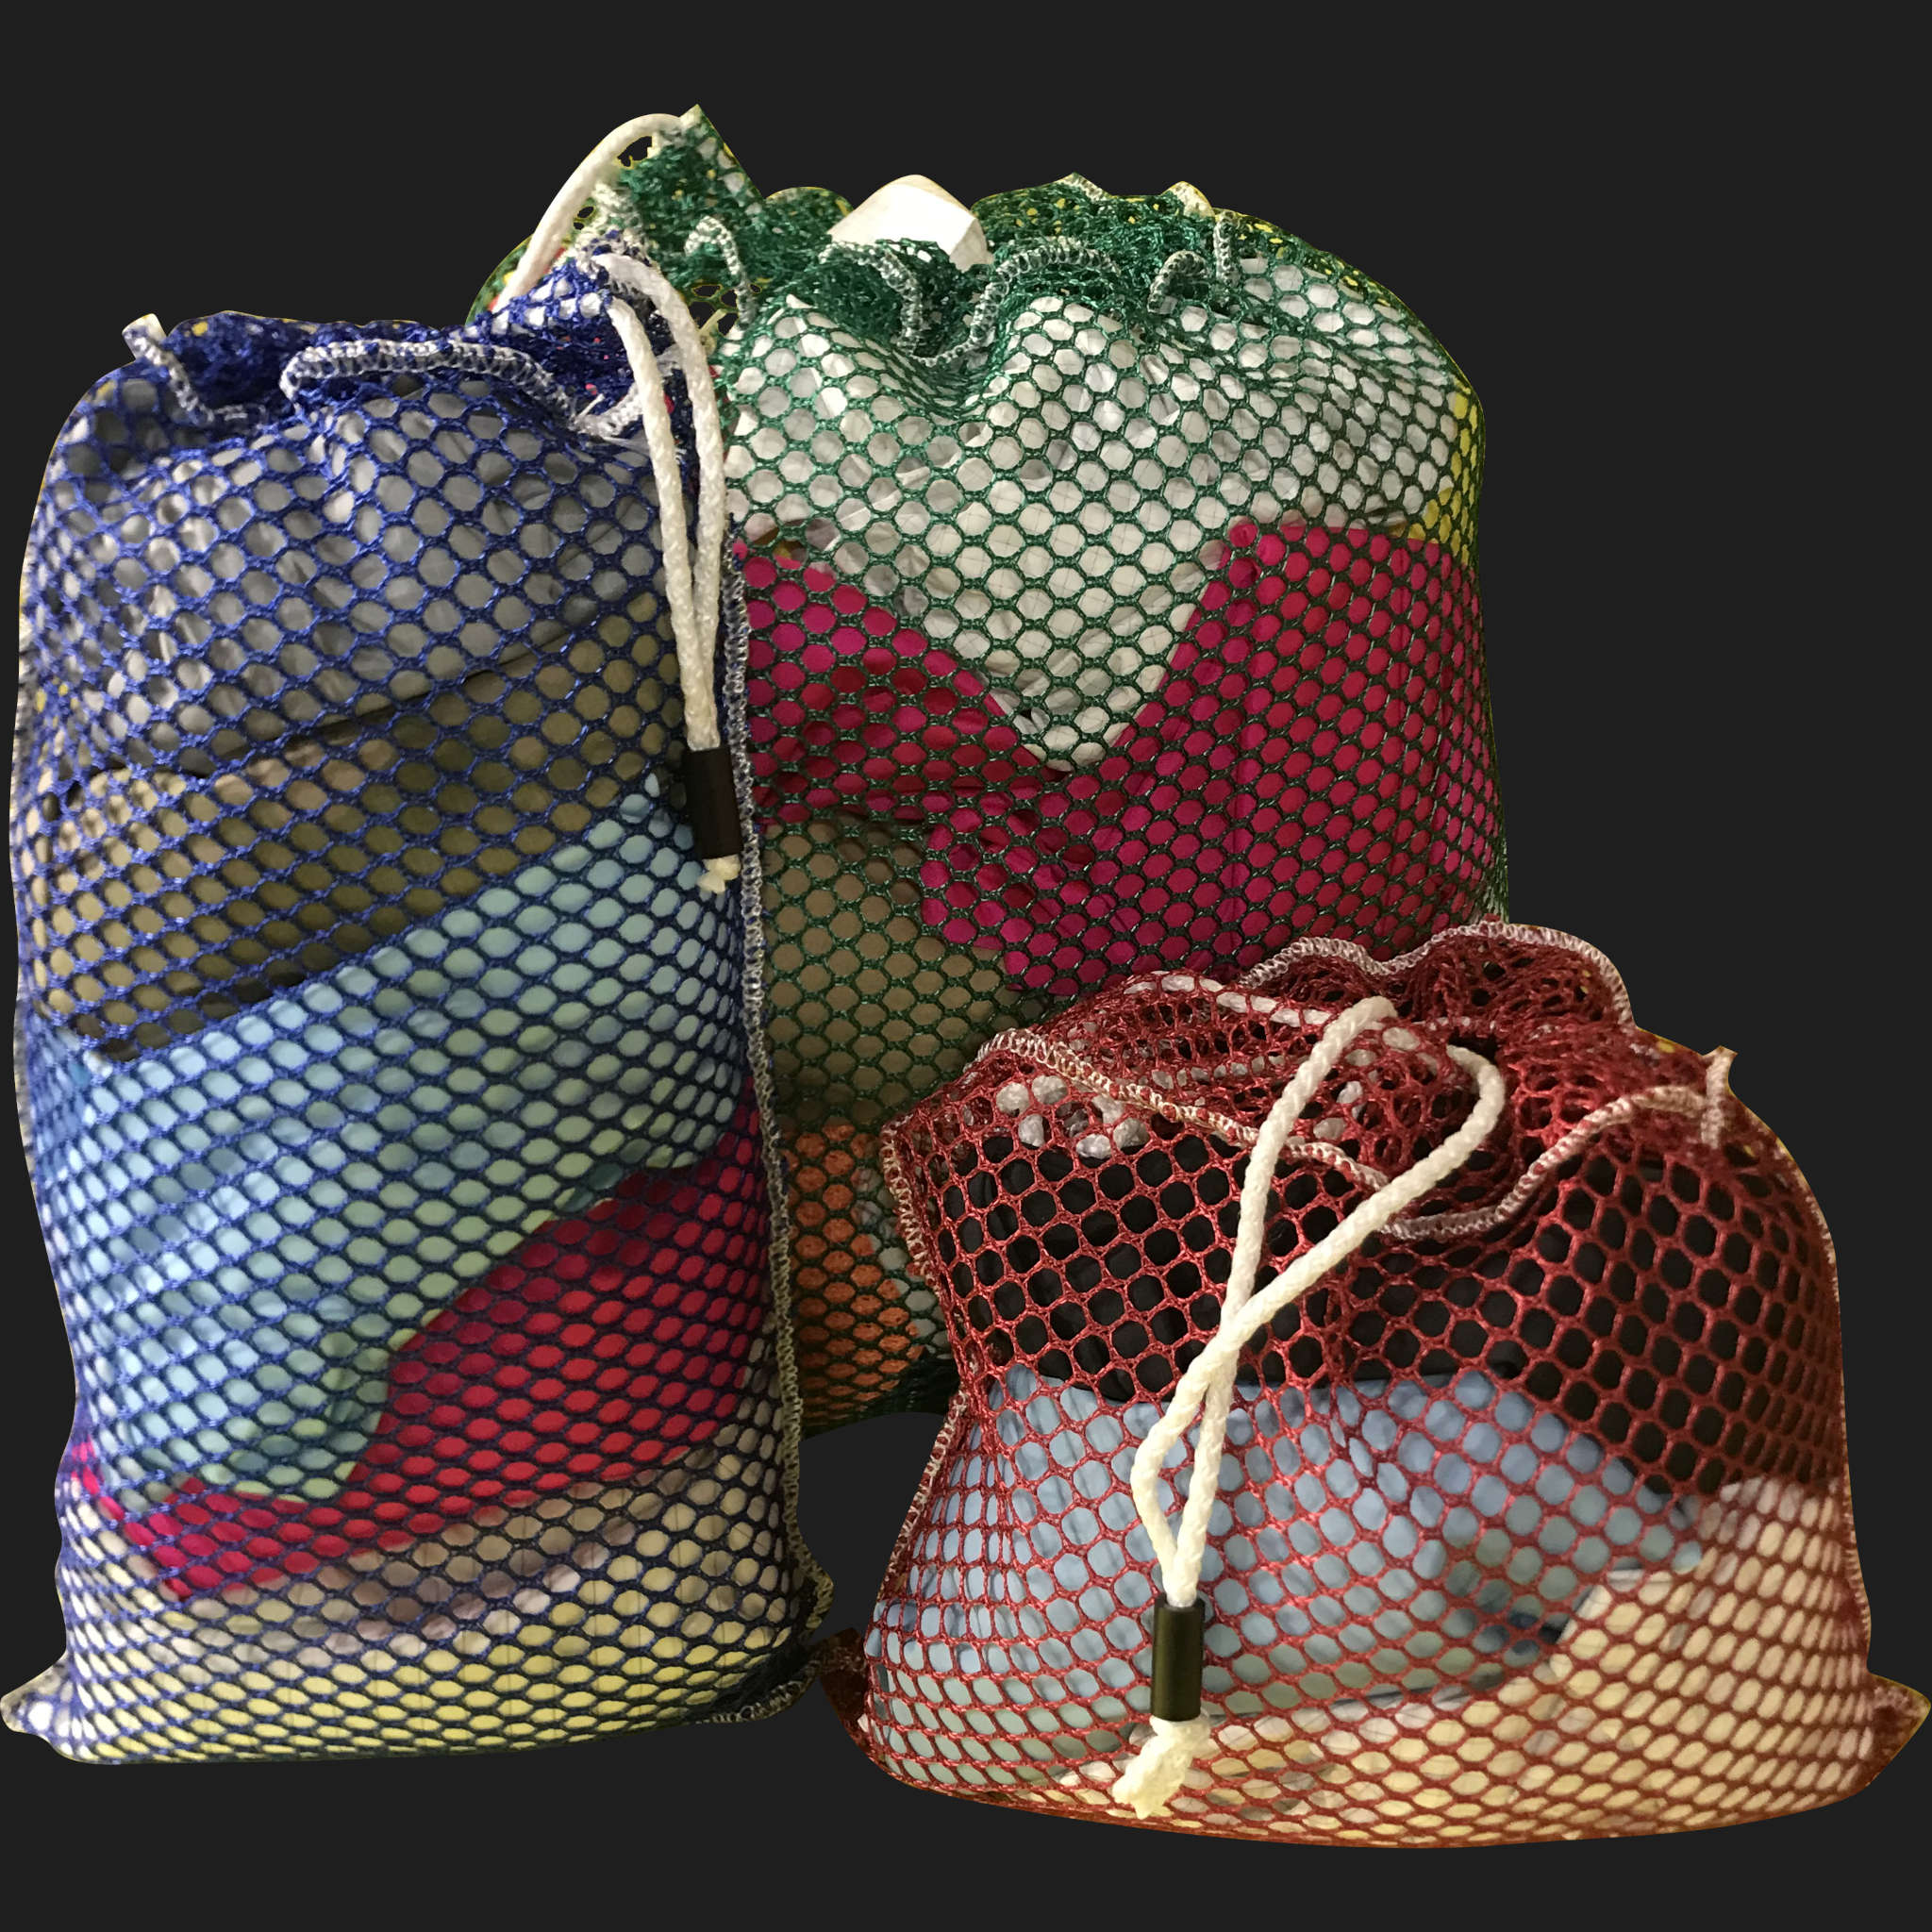 38" x 56" Customized Mesh-Net-Laundry Bags Heavy Duty with Cord and barrellock closure